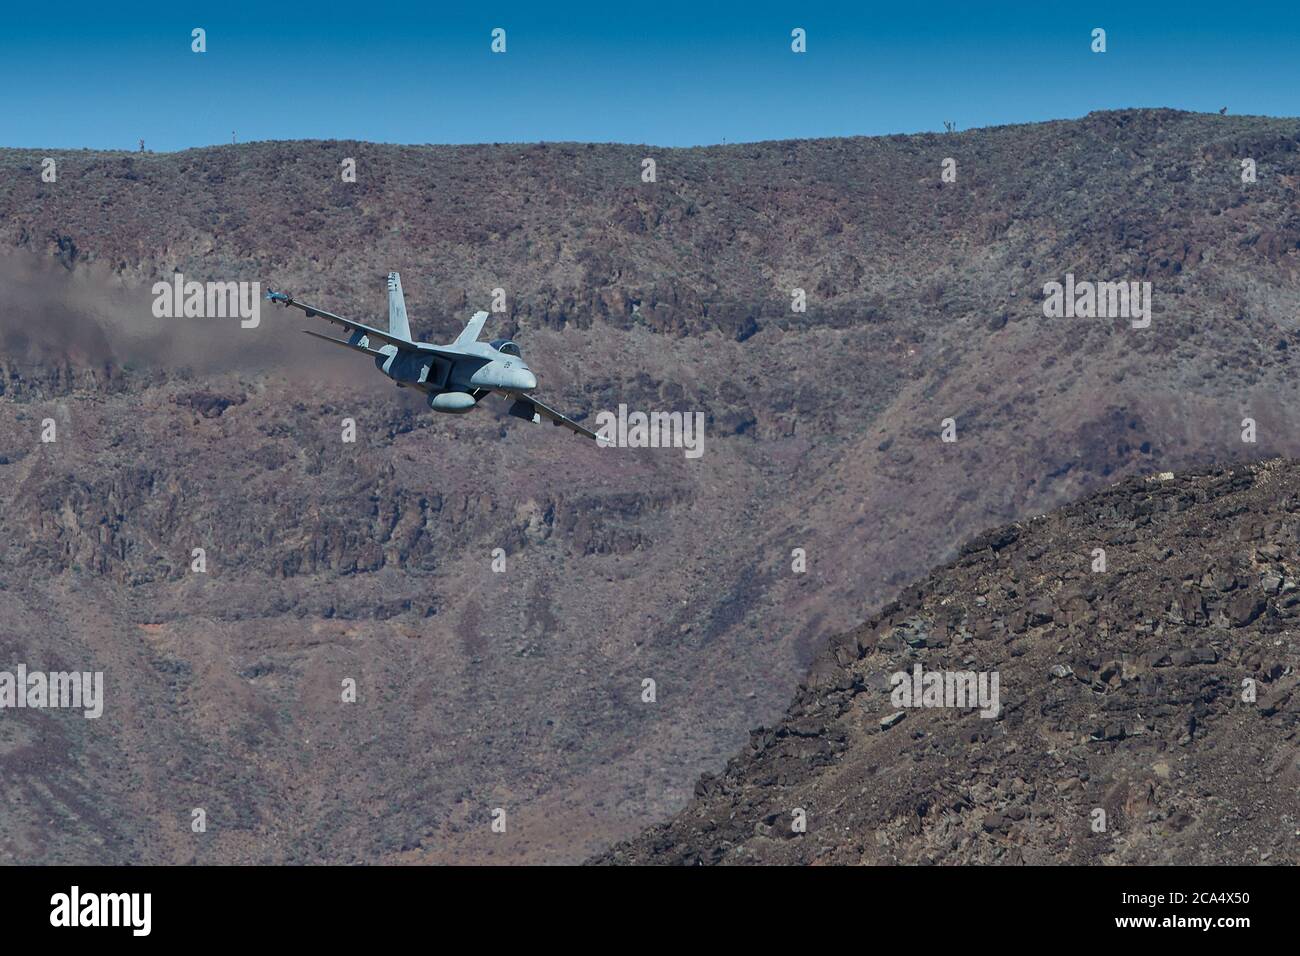 United States Navy F/A-18E Super Hornet Fighter Jet, Flying At High Speed And Low Level. Through A Desert Canyon. Stock Photo